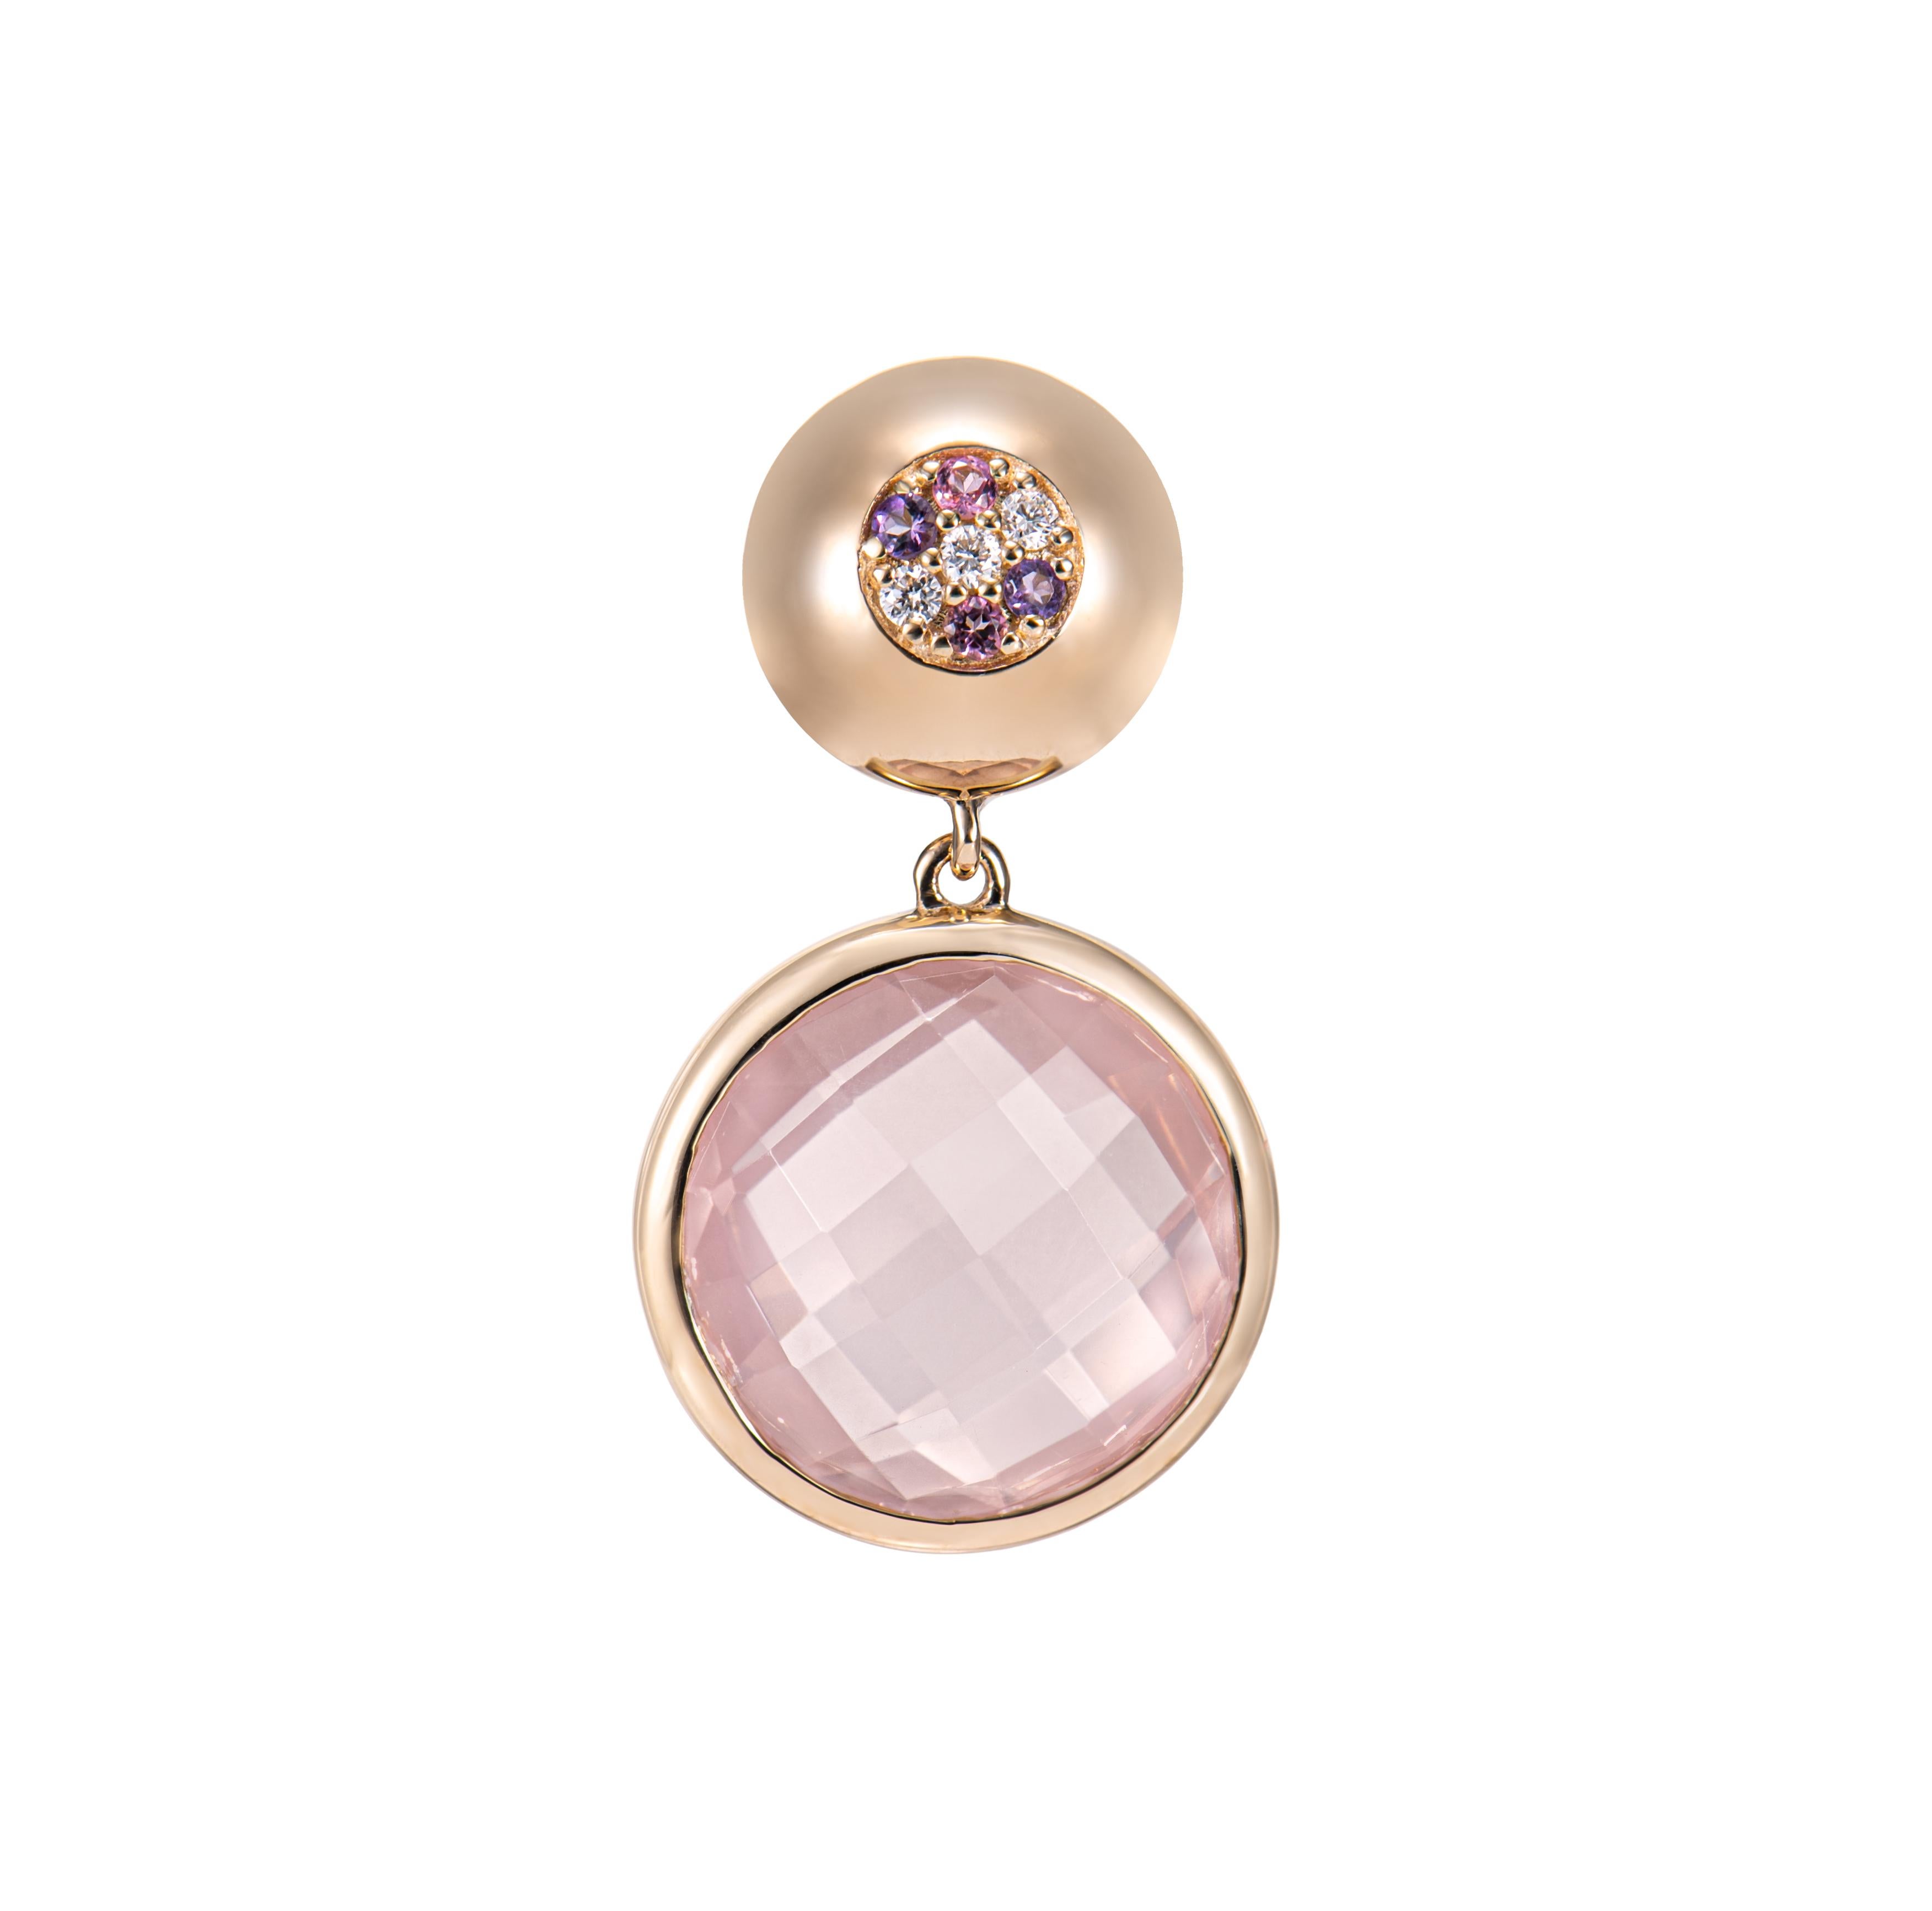 Contemporary 9.27 Carat Rose Quartz Pendant in 18KYG with Tourmaline, Amethyst and Diamond. For Sale